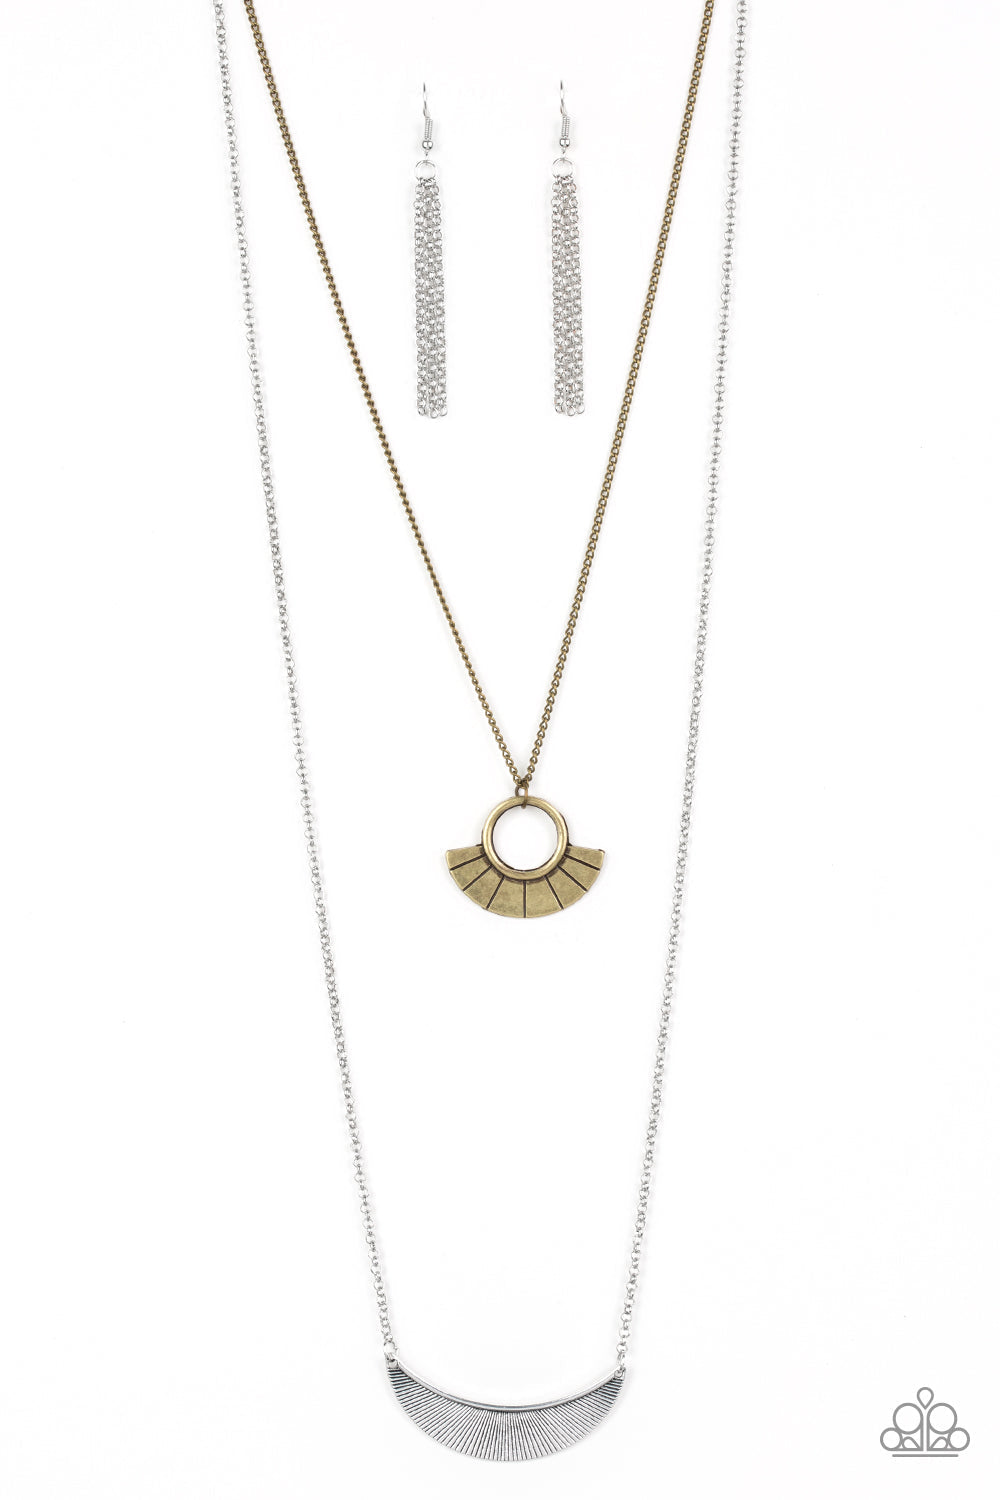 Tribal Trek - Multi Metal Fashion Necklace - Paparazzi Accessories - Brass frame swings above a silver half-moon frame, creating tribal inspired layers below the collar. Features an adjustable clasp closure.